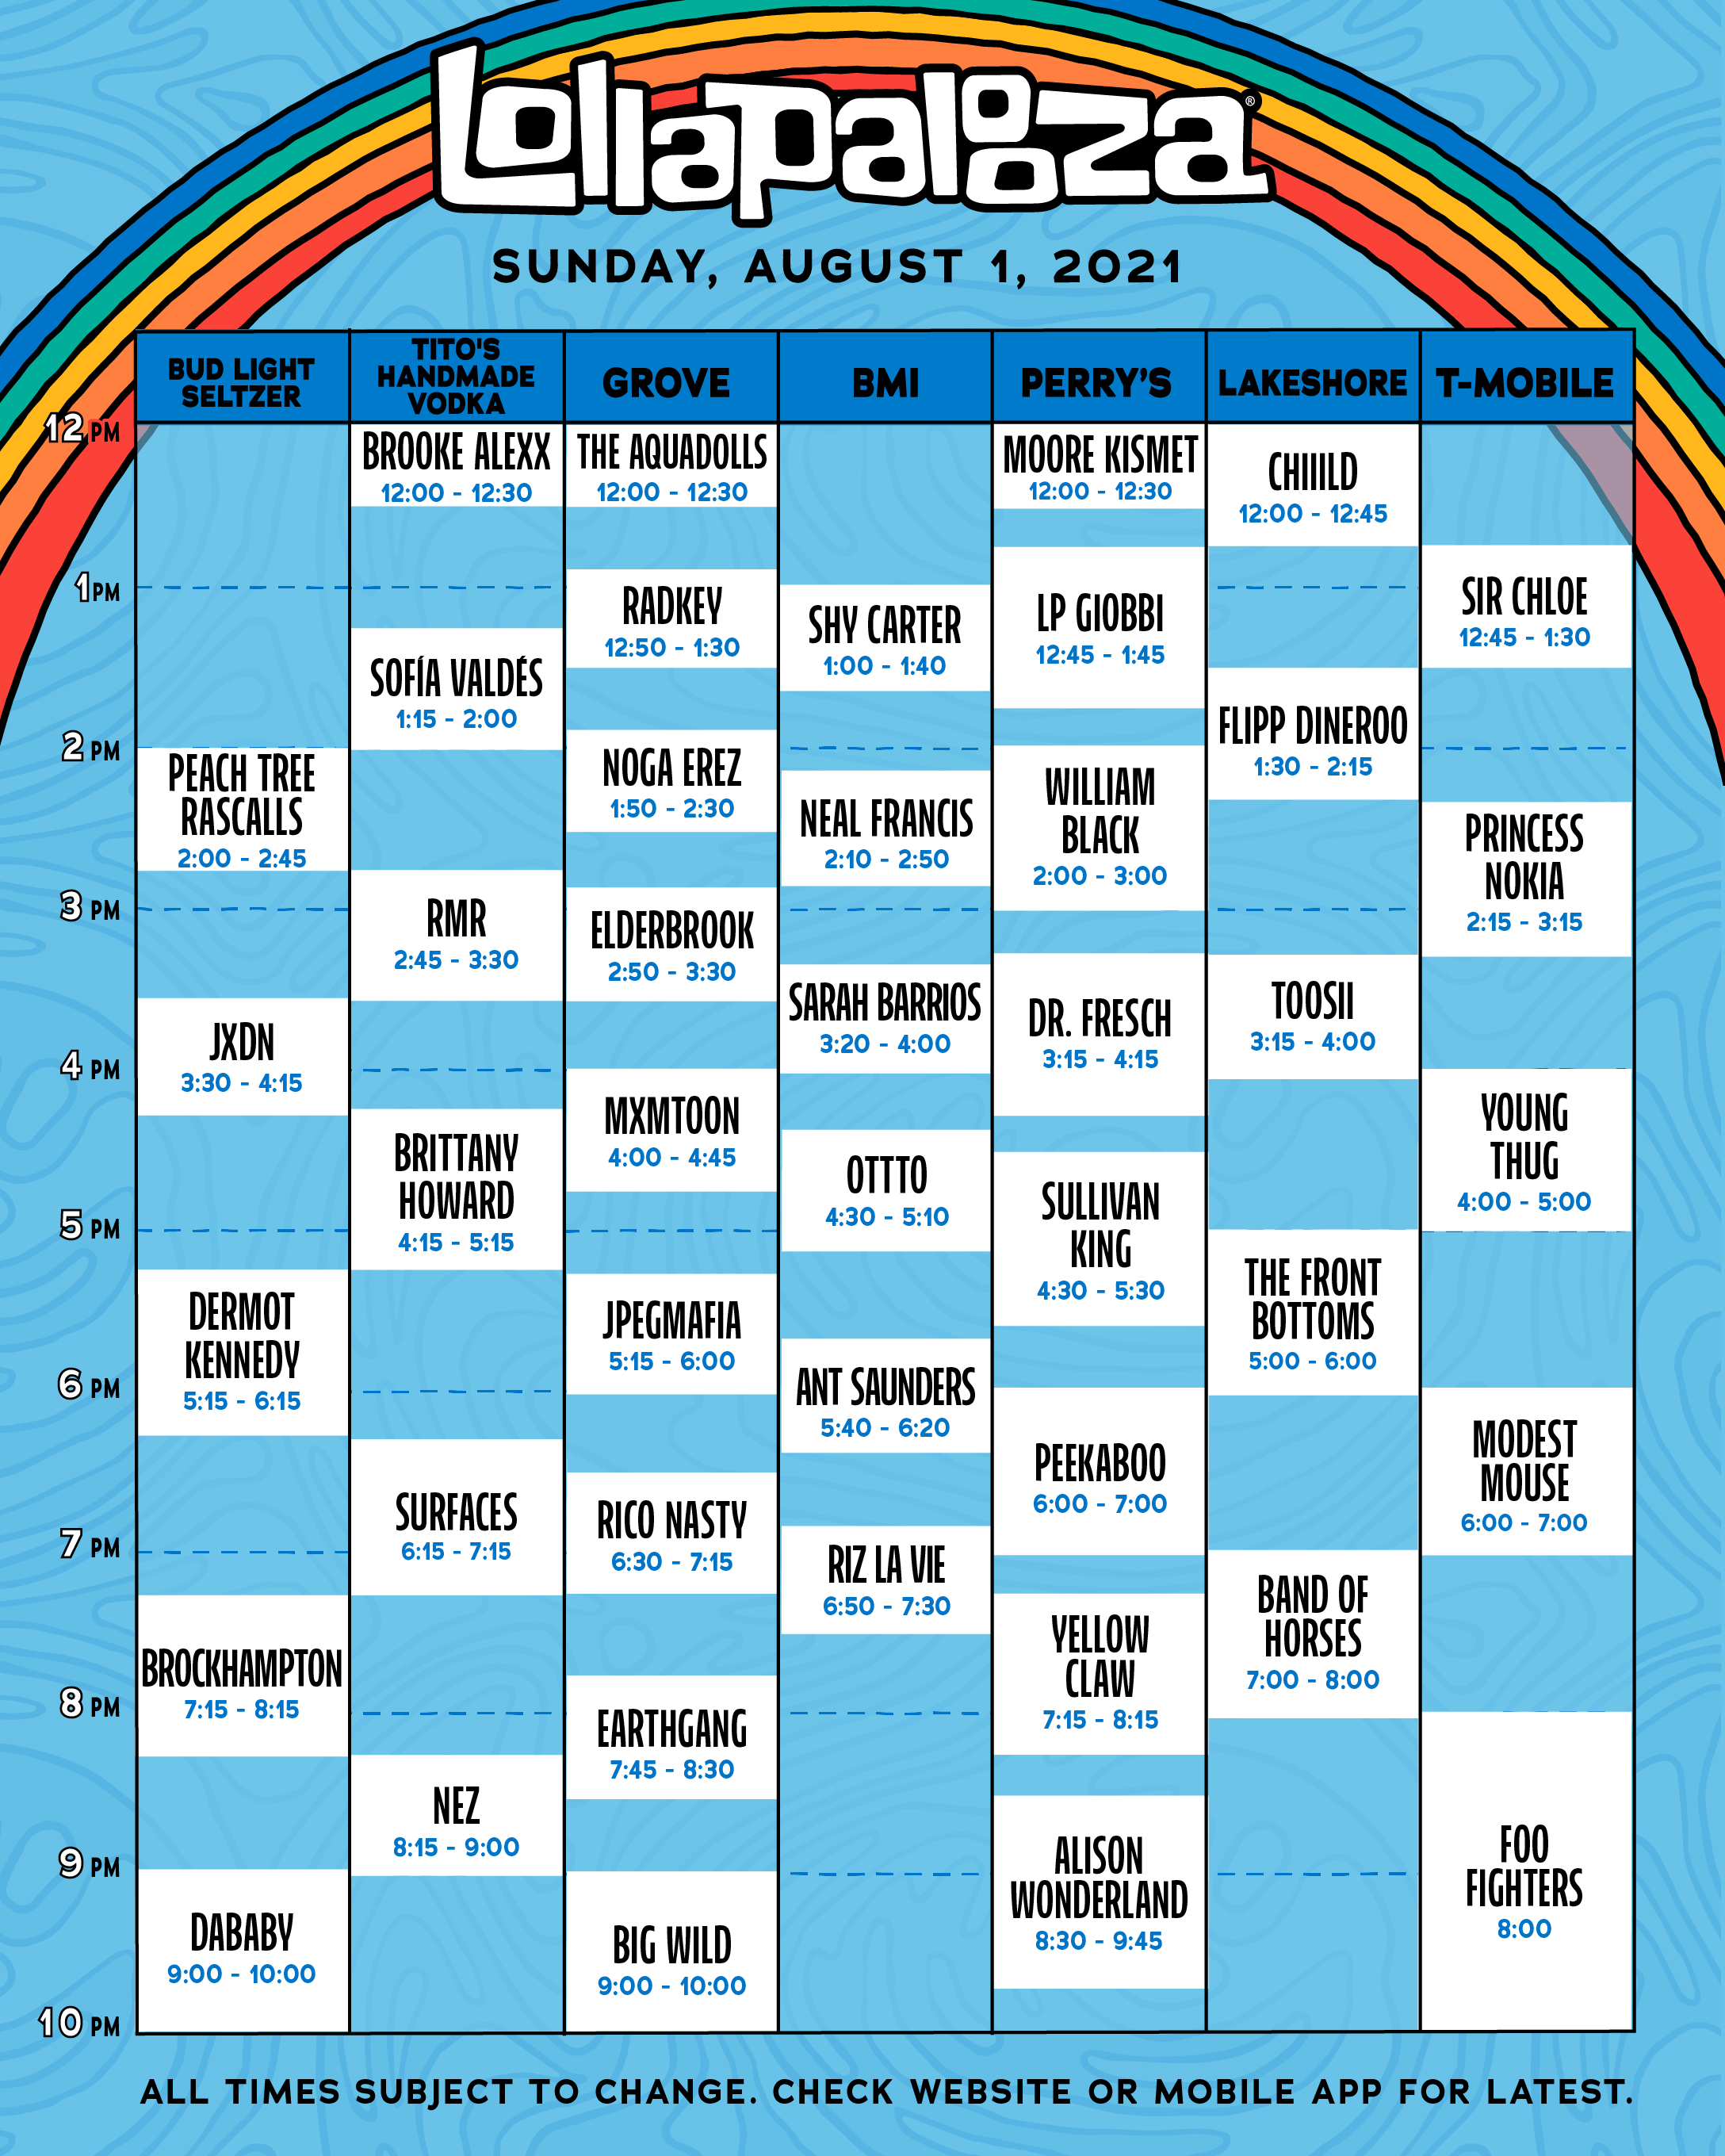 Lollapalooza Full 2021 Schedule Announced! 4